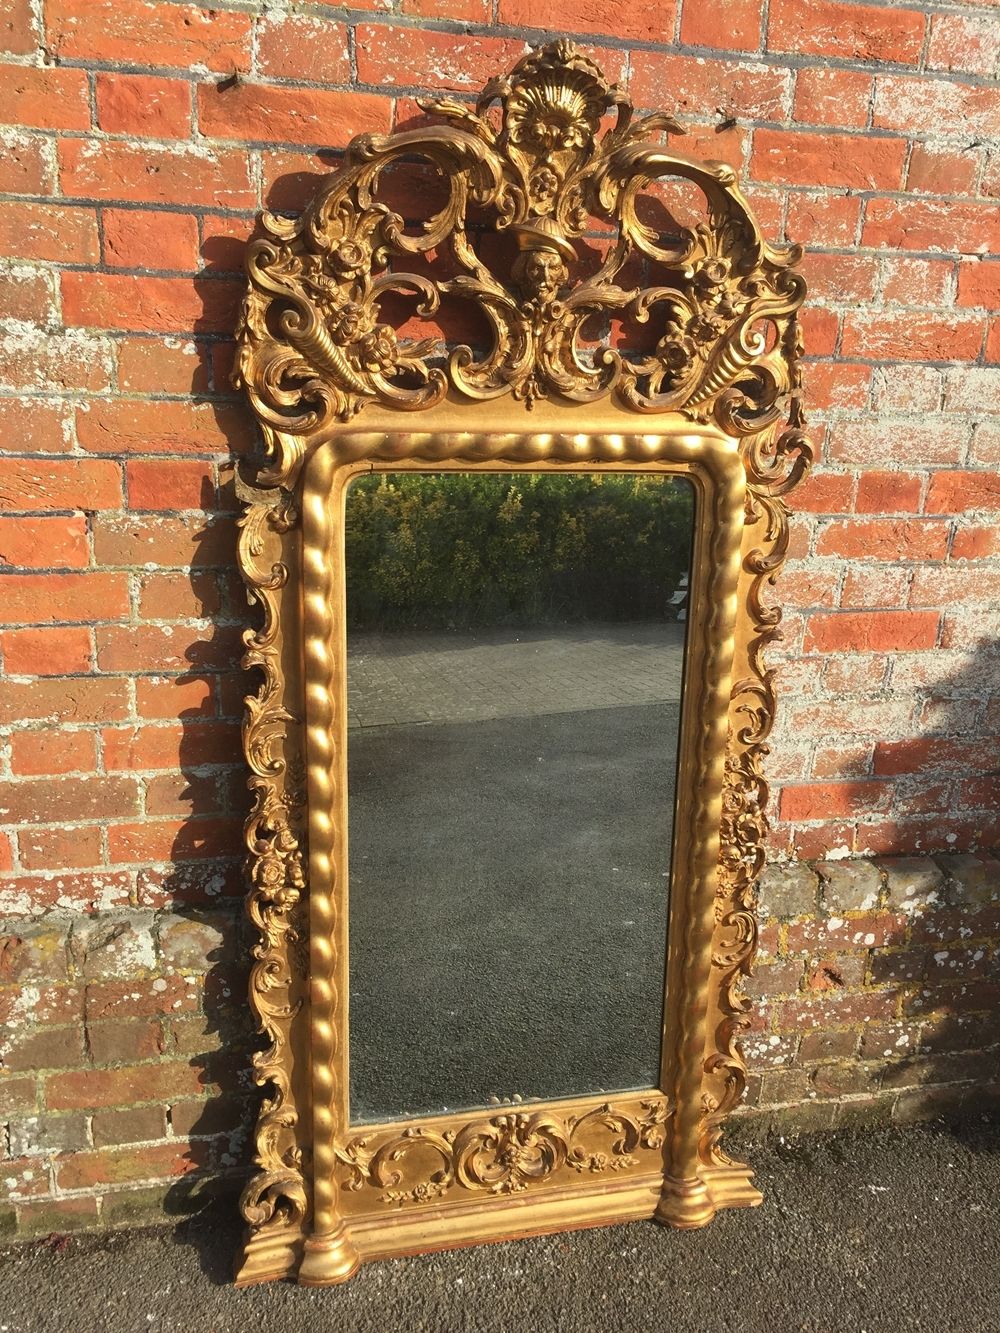 Large Overmantle Mirrors Uk Antique Overmantle Mirrors For Sale In Antique French Mirrors For Sale (View 7 of 15)